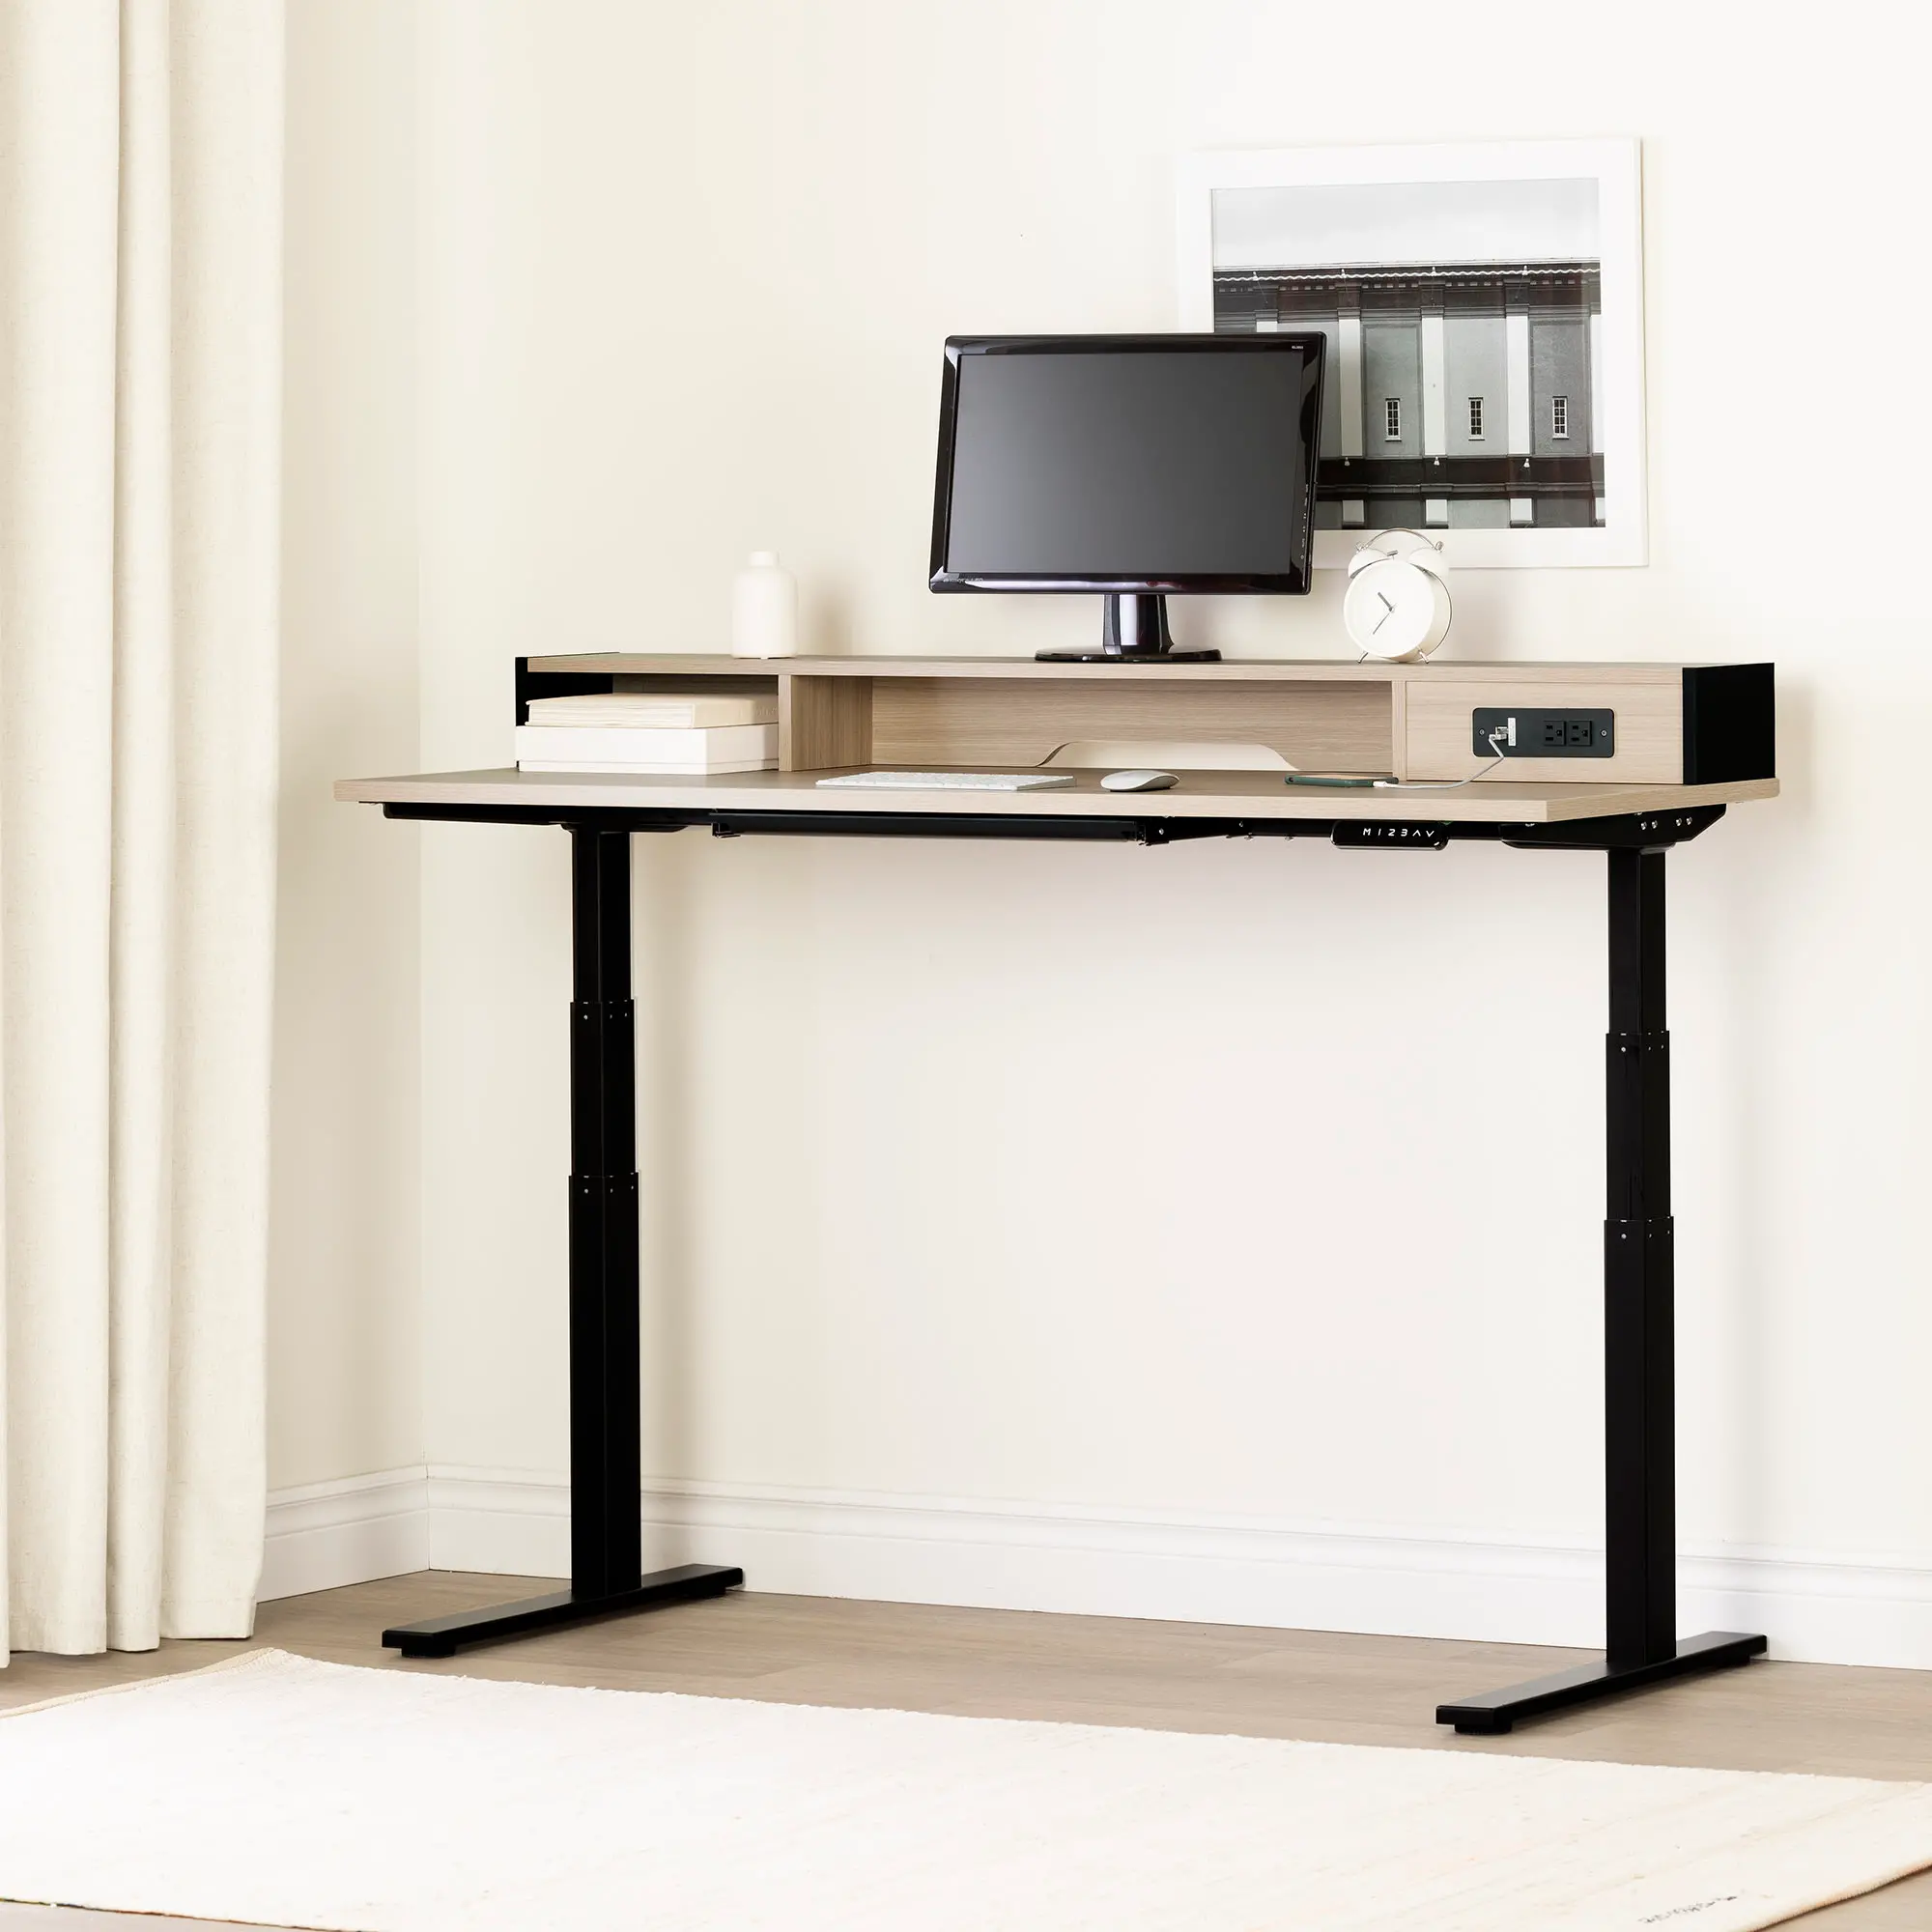 https://static.rcwilley.com/products/112728642/Majyta-Light-Brown-and-Black-Adjustable-Height-Standing-Desk-with-Built-In-Power-Bar---South-Shore-rcwilley-image1.webp